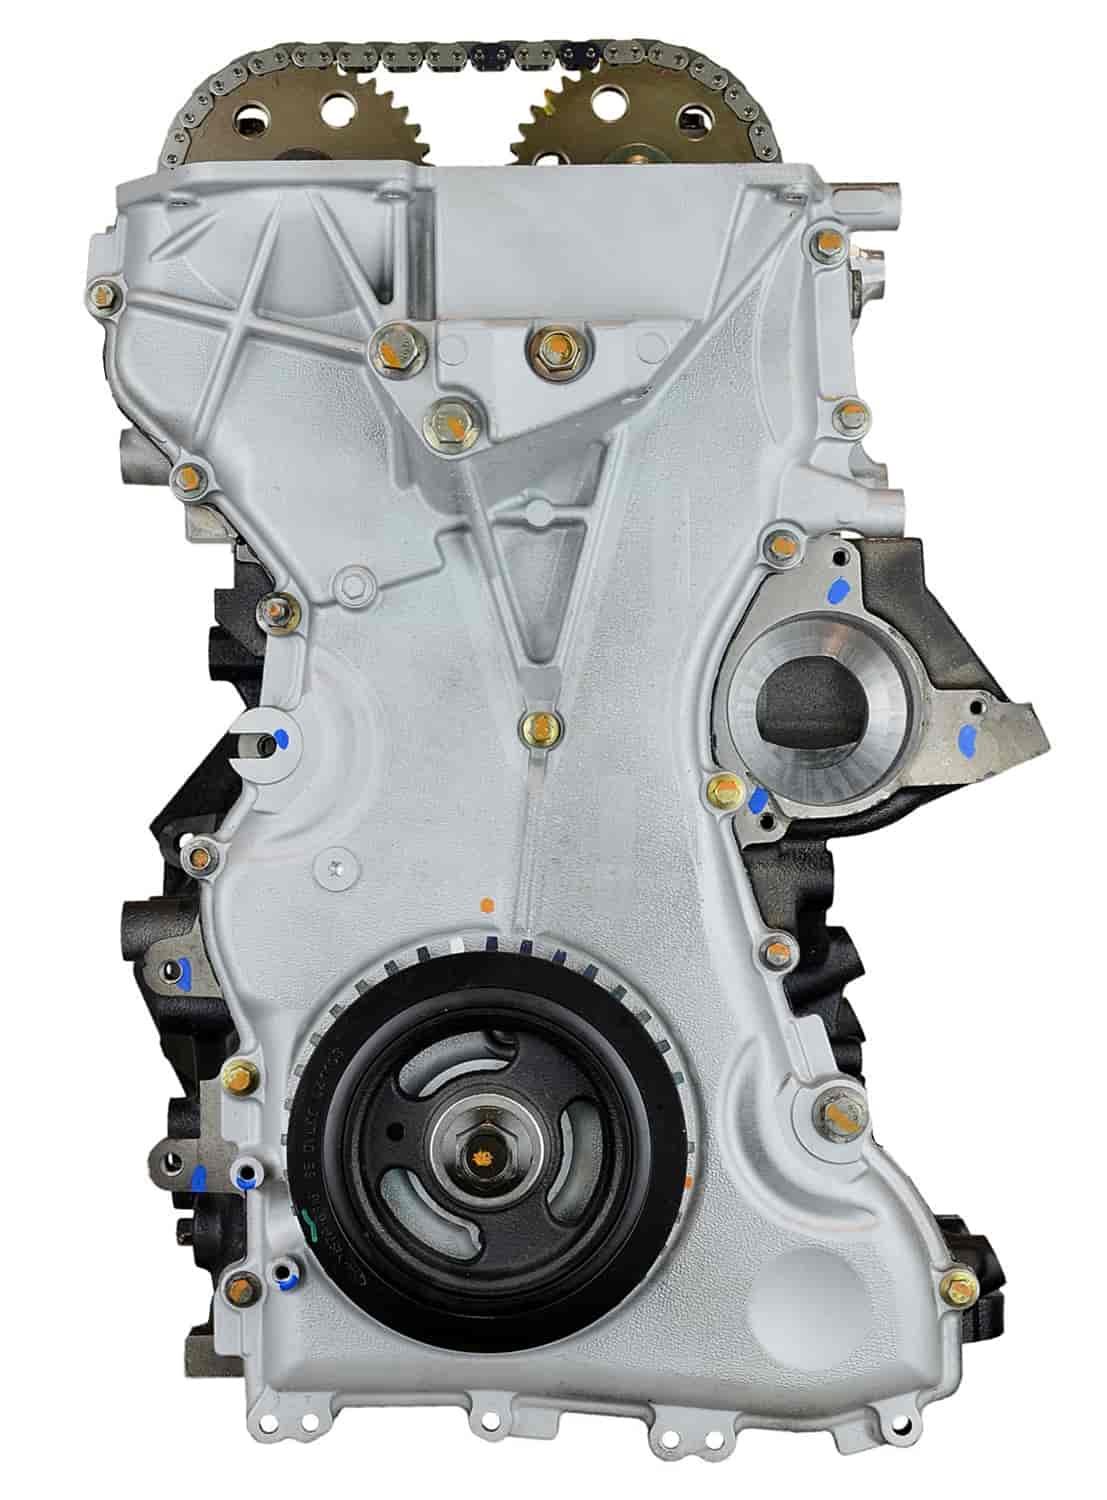 Remanufactured Crate Engine for 2005-2008 Ford Focus with 2.0L L4